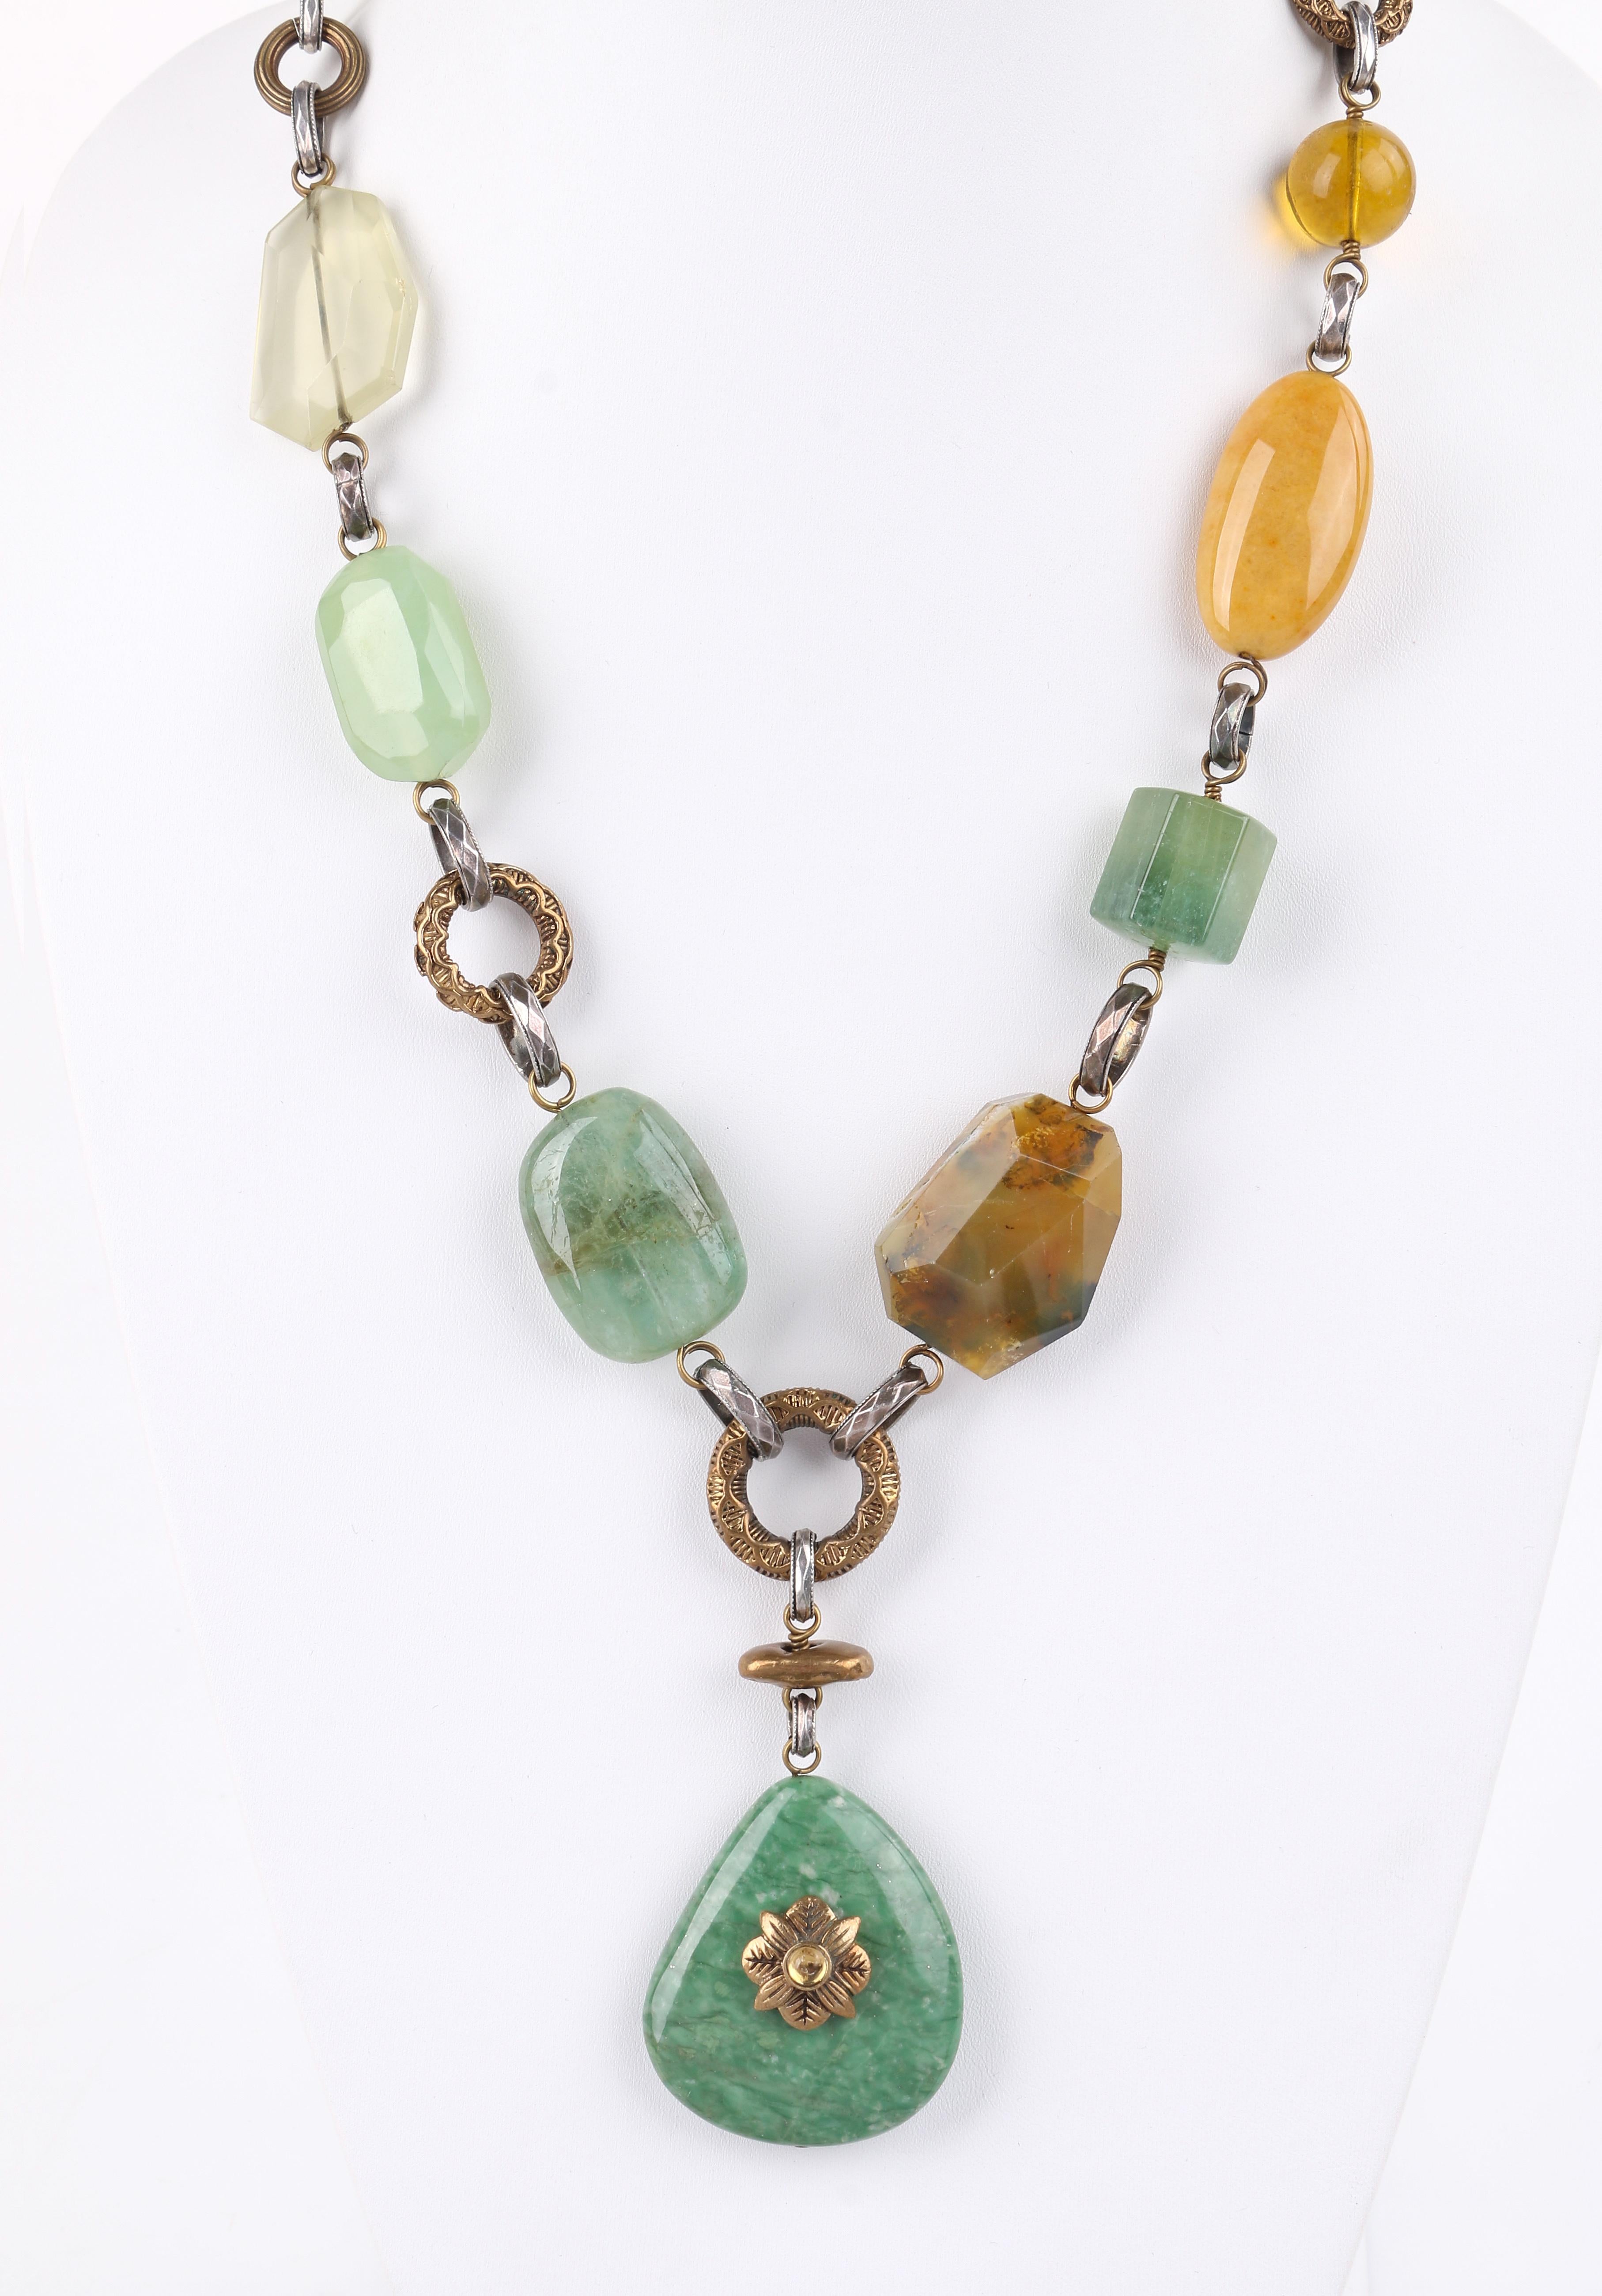 STEPHEN DWECK Multi Stone Quartz Amazonite Sterling Silver Link Pendant Necklace

Brand / Manufacturer: Stephen Dweck
Style: Multi stone link pendant necklace
Color(s): Shades of silver, gold, green, and yellow
Marked Material: Sterling silver